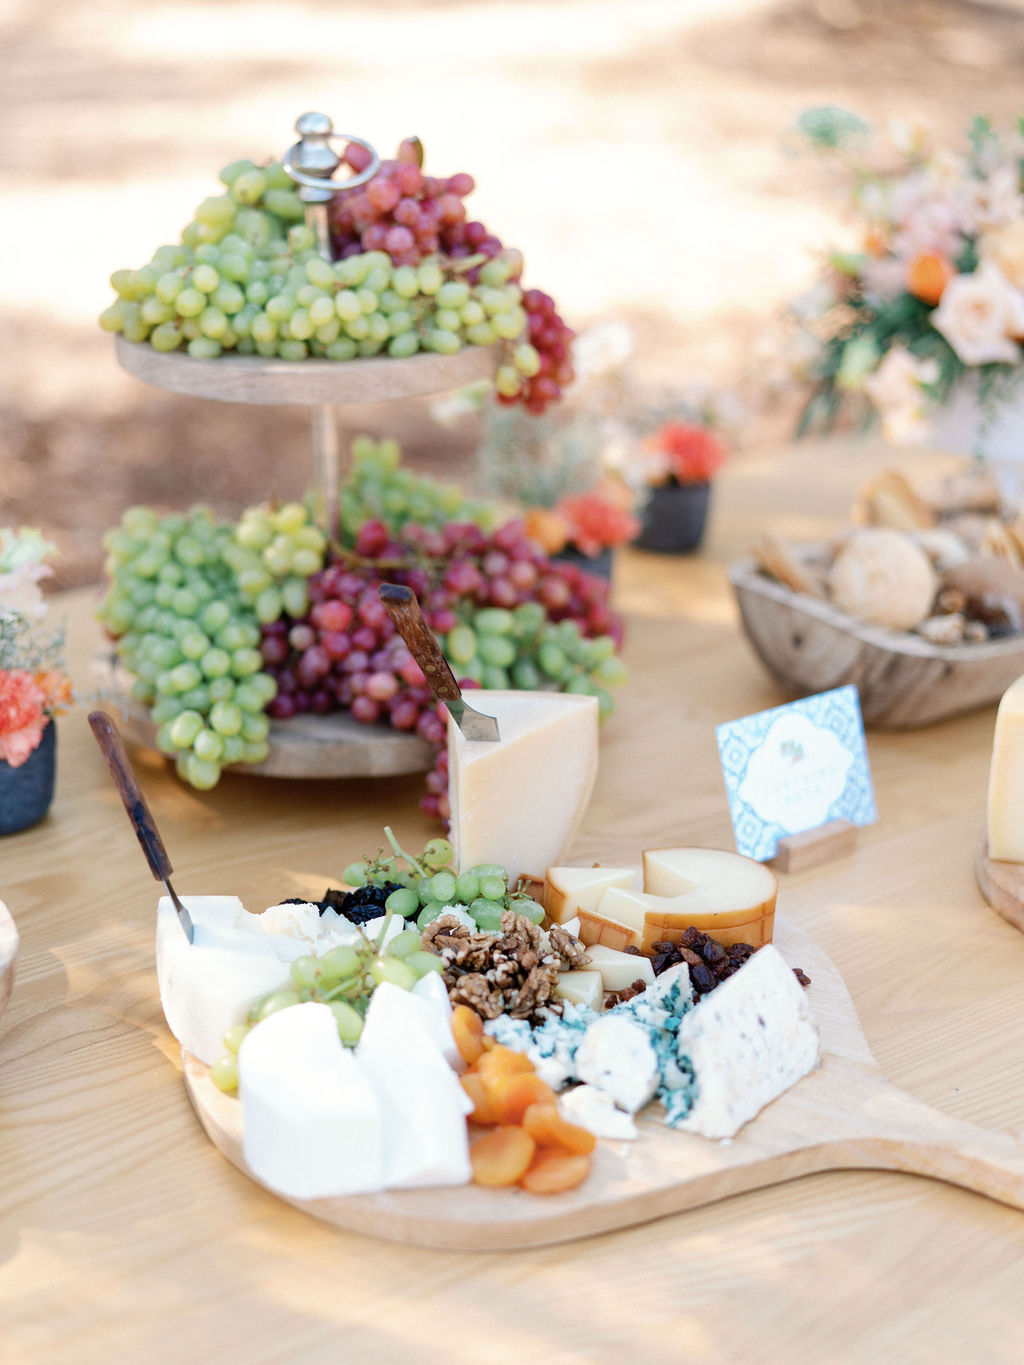 Olive Grove Wedding In Greece - Food Station